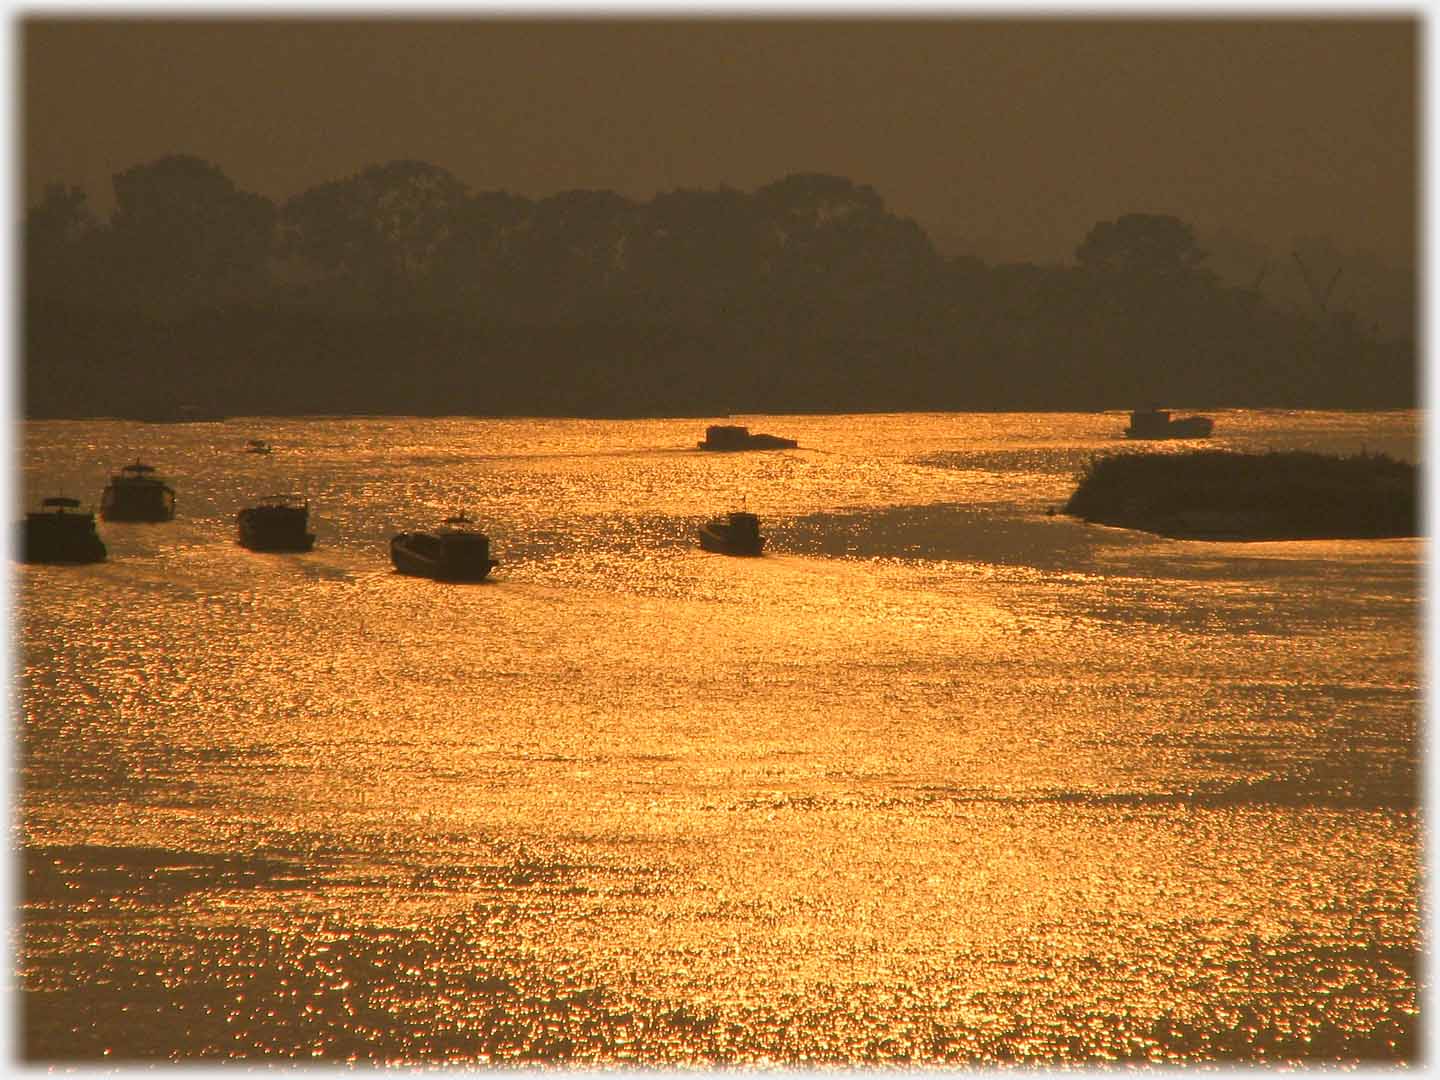 Number of boats on wide river whole of which is covered with shimmering reflected sunset.